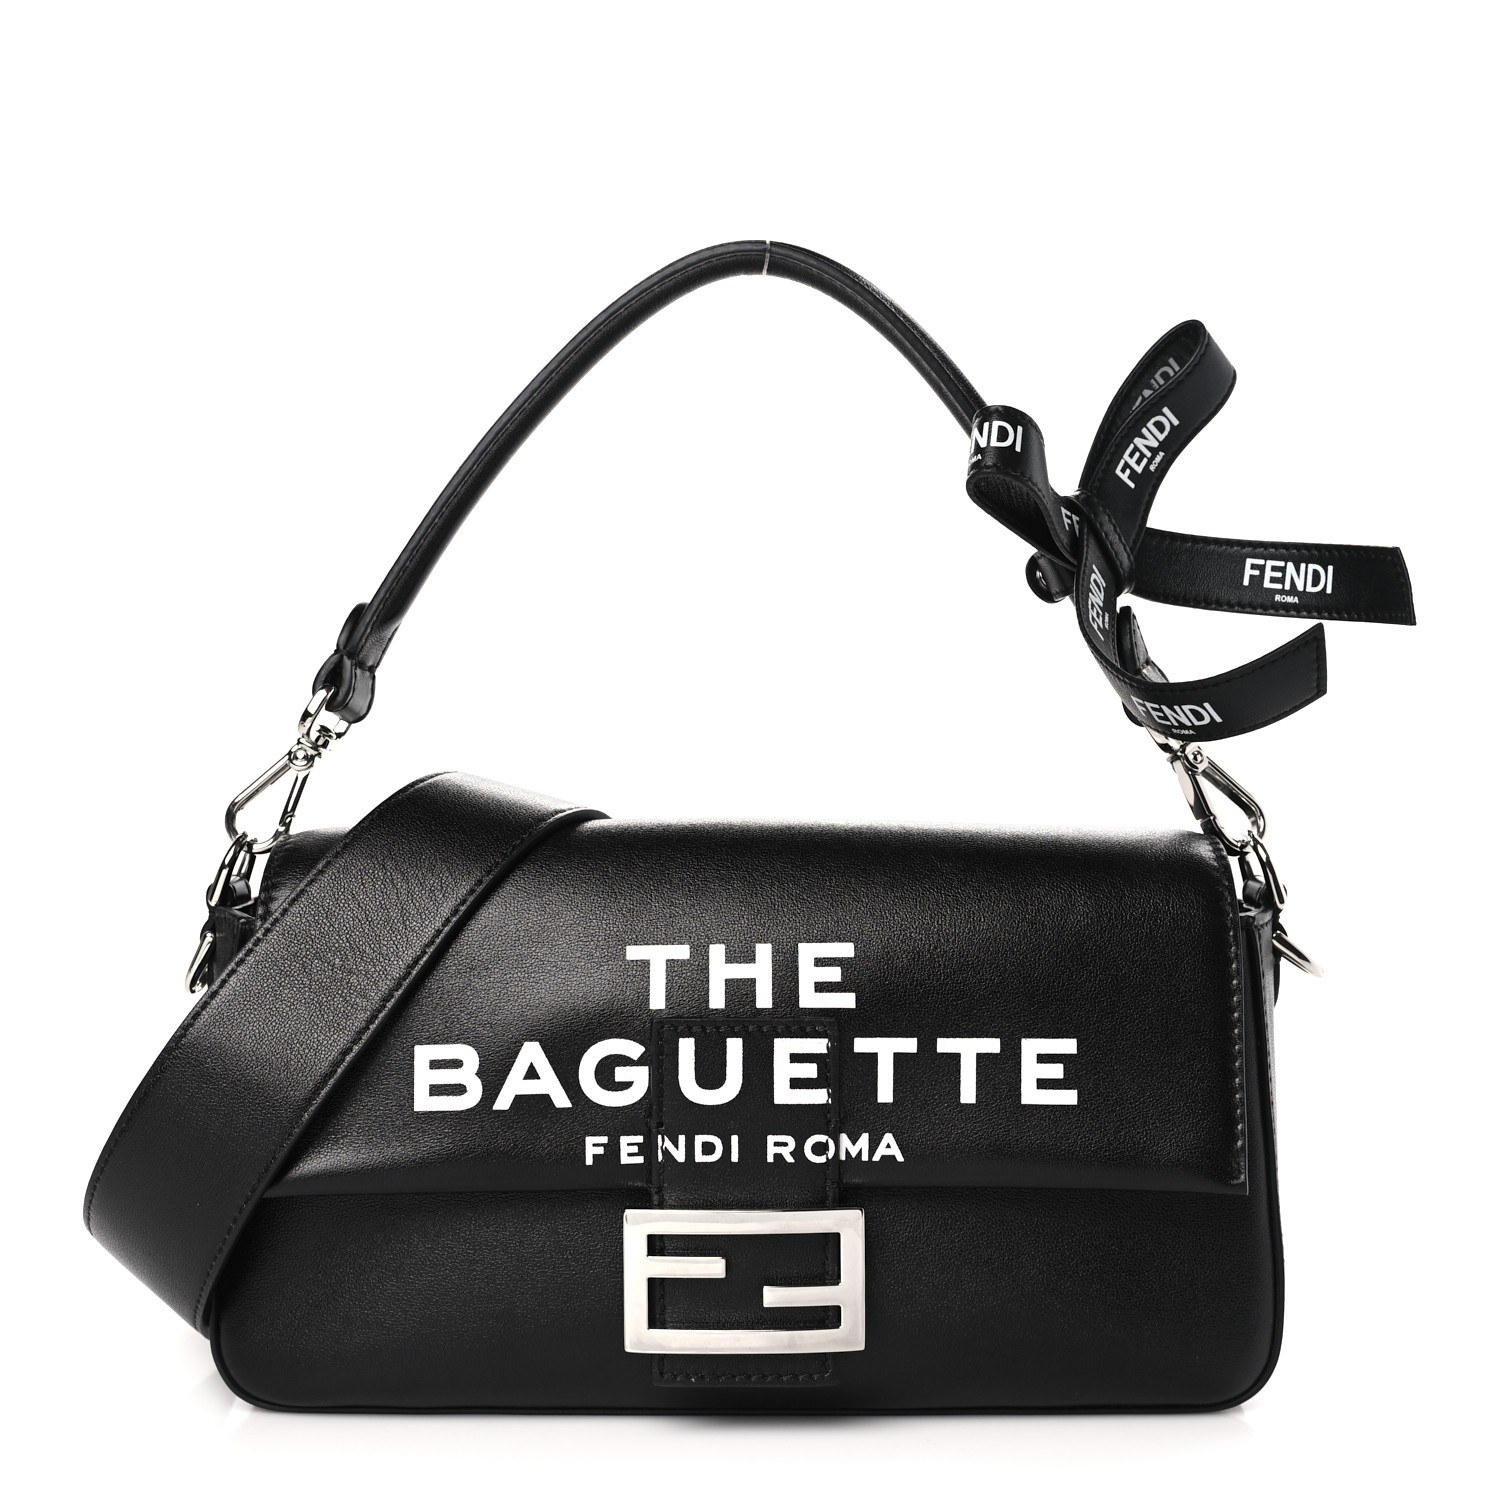 image of FENDI X MARC JACOBS Nappa Logo Medium Baguette in the color Black by FASHIONPHILE